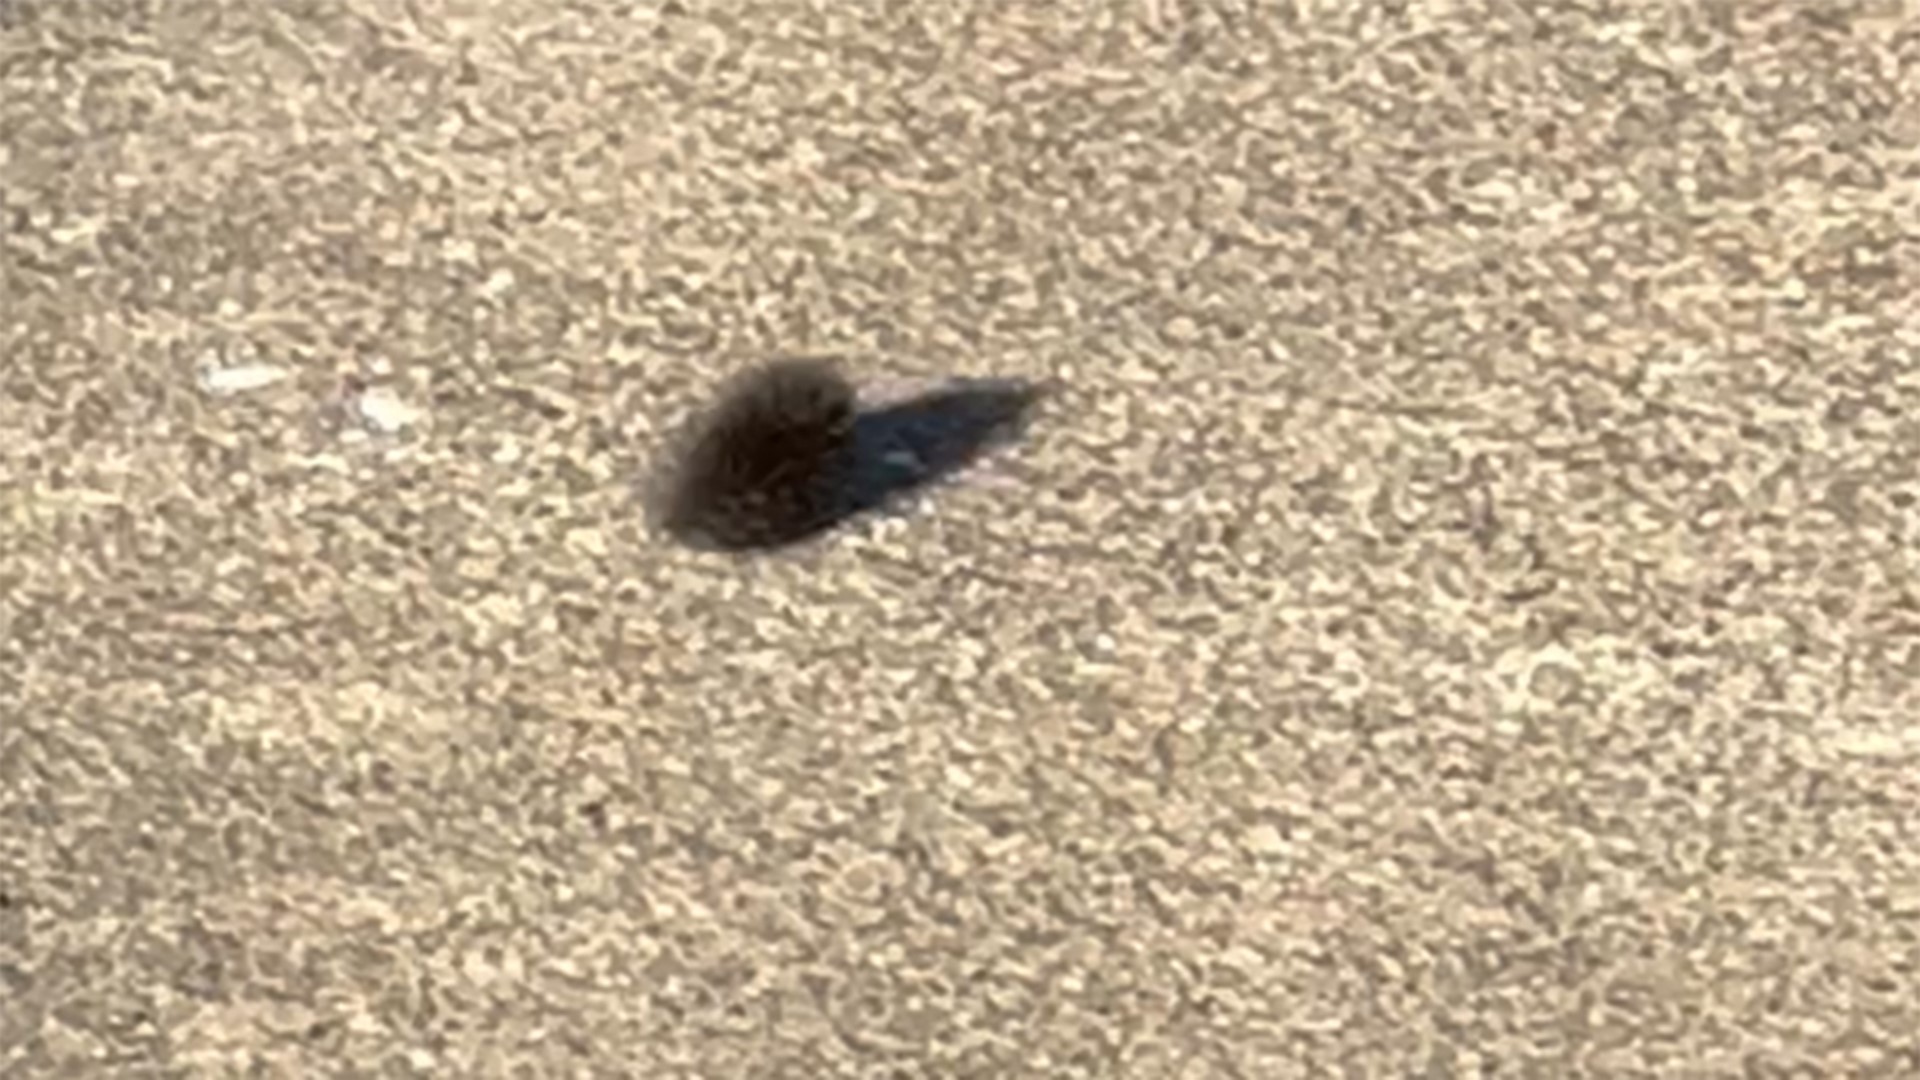 We sent video shot by a KHOU 11 producer to the Texas A&M department of entomology to identify.  They said it's likely a  saltmarsh moth caterpillar.